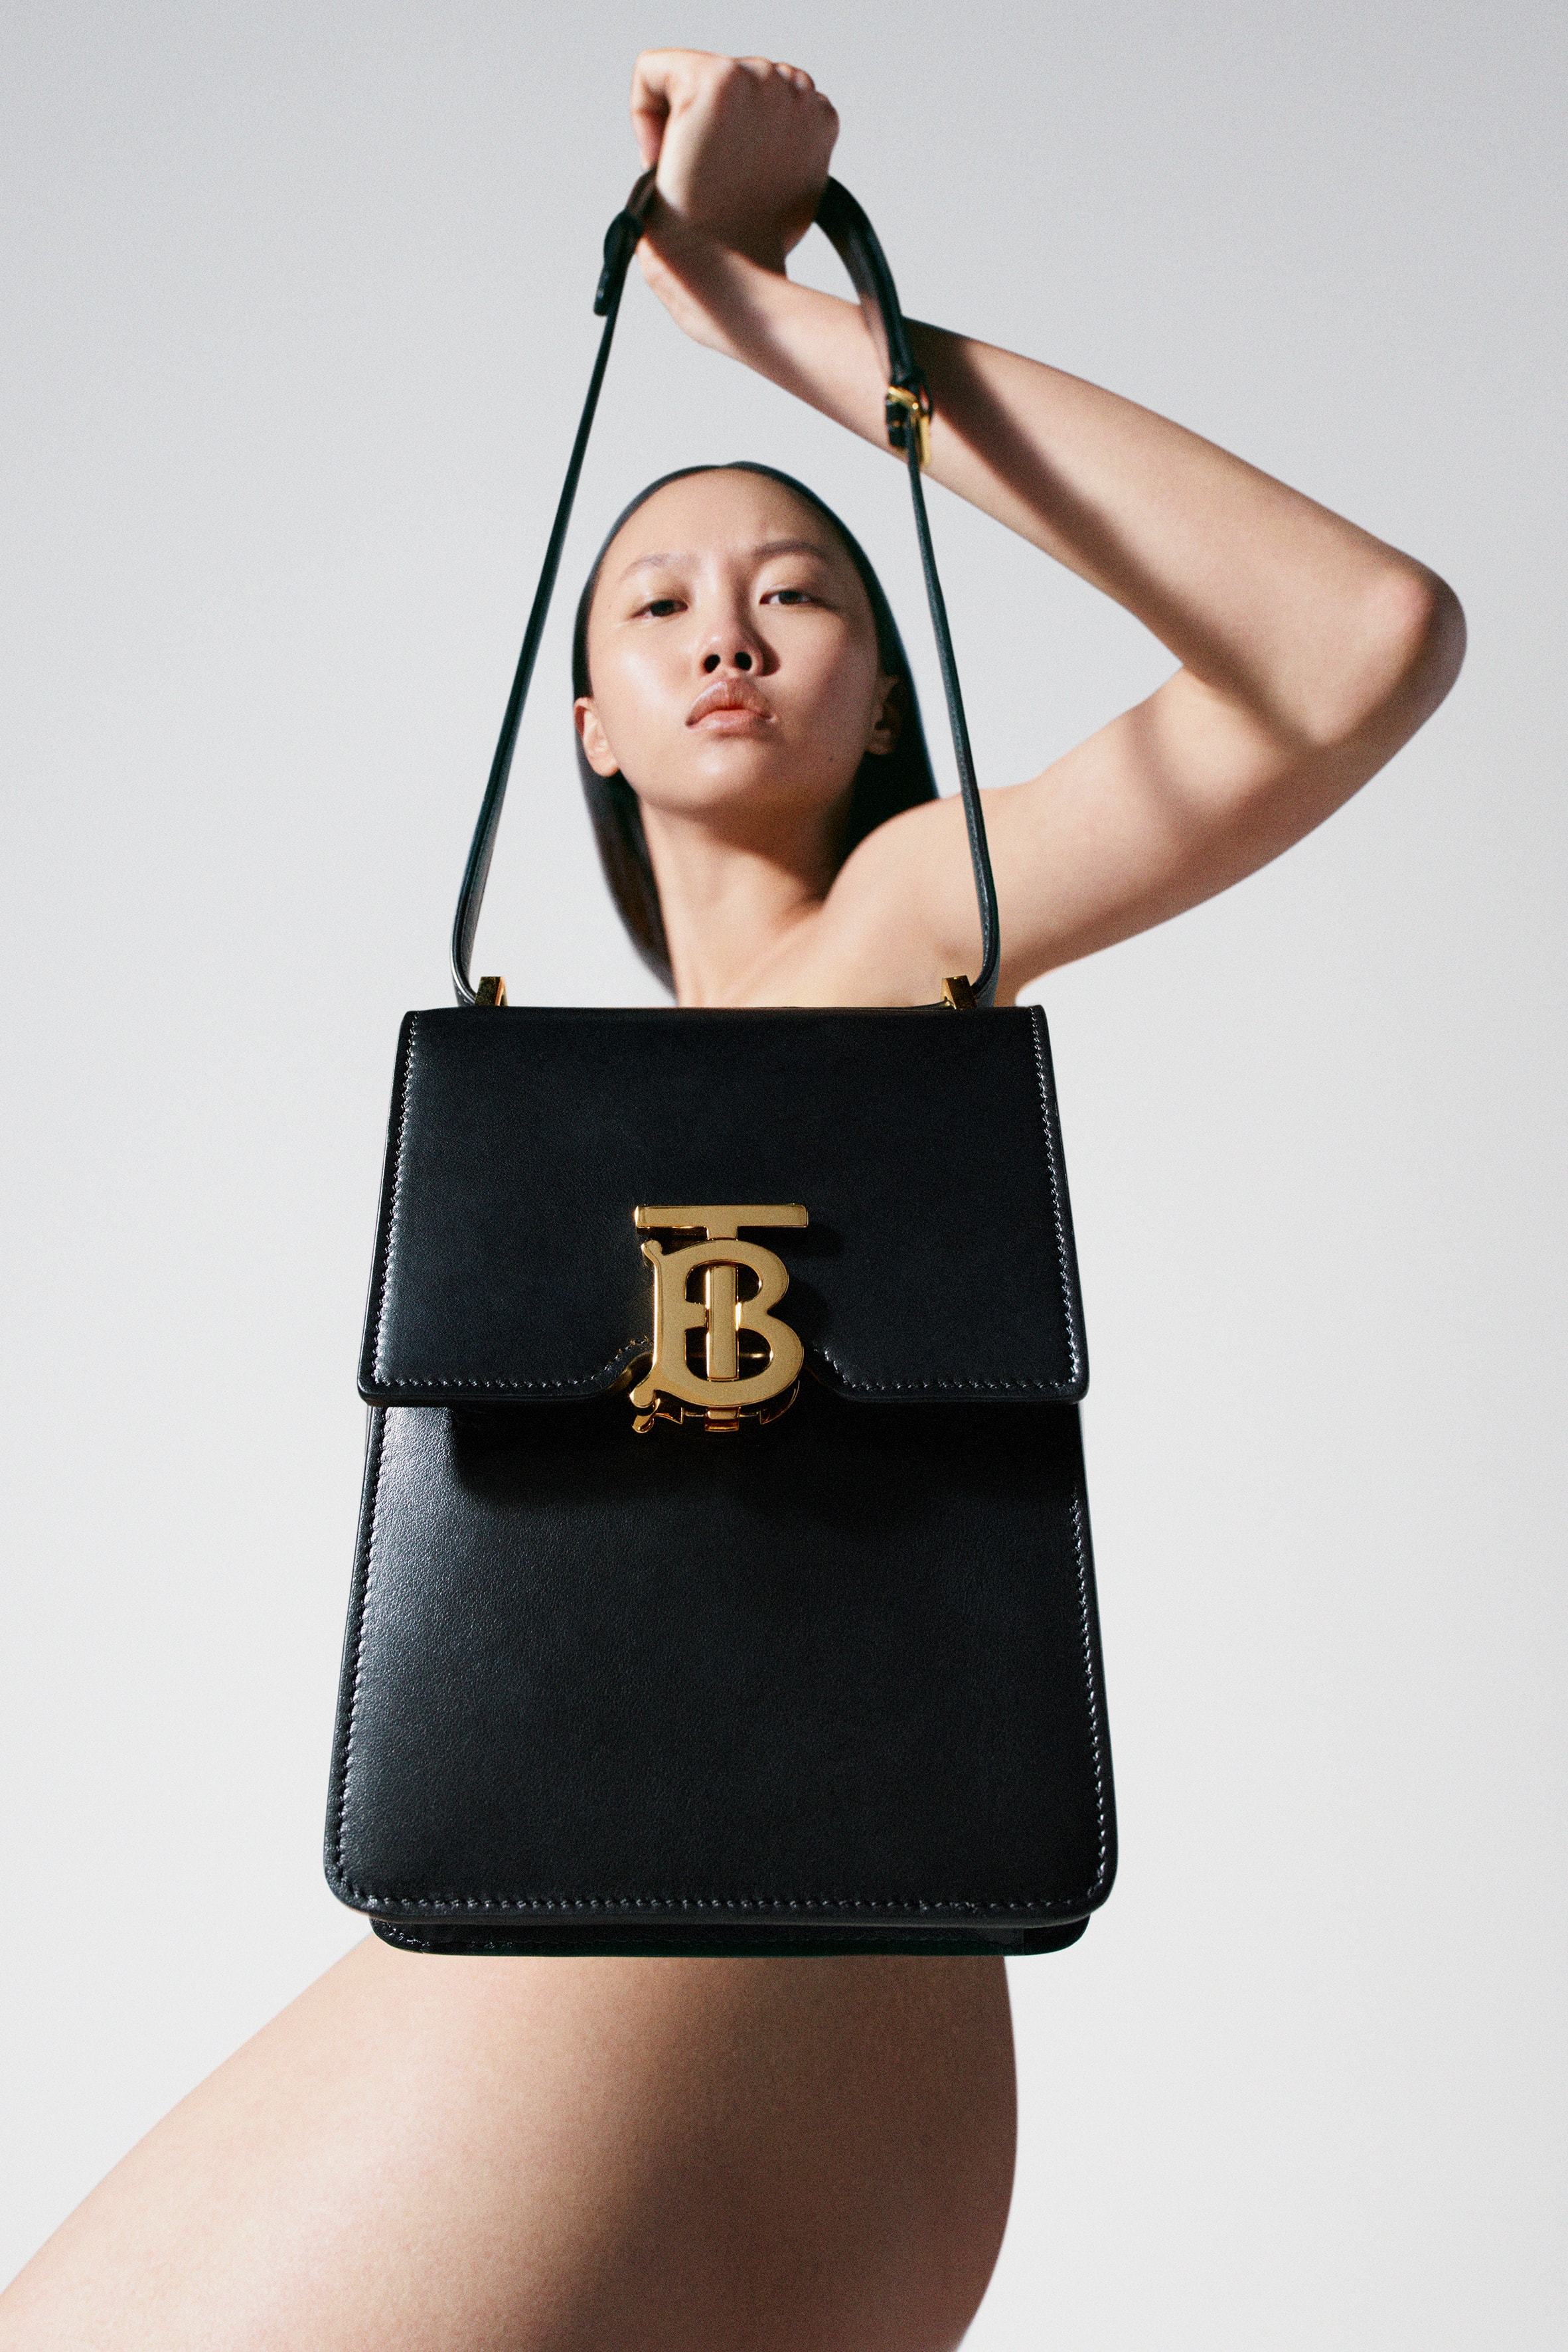 Burberry B Series Black Leather Logo Bag Drop Release Campaign 